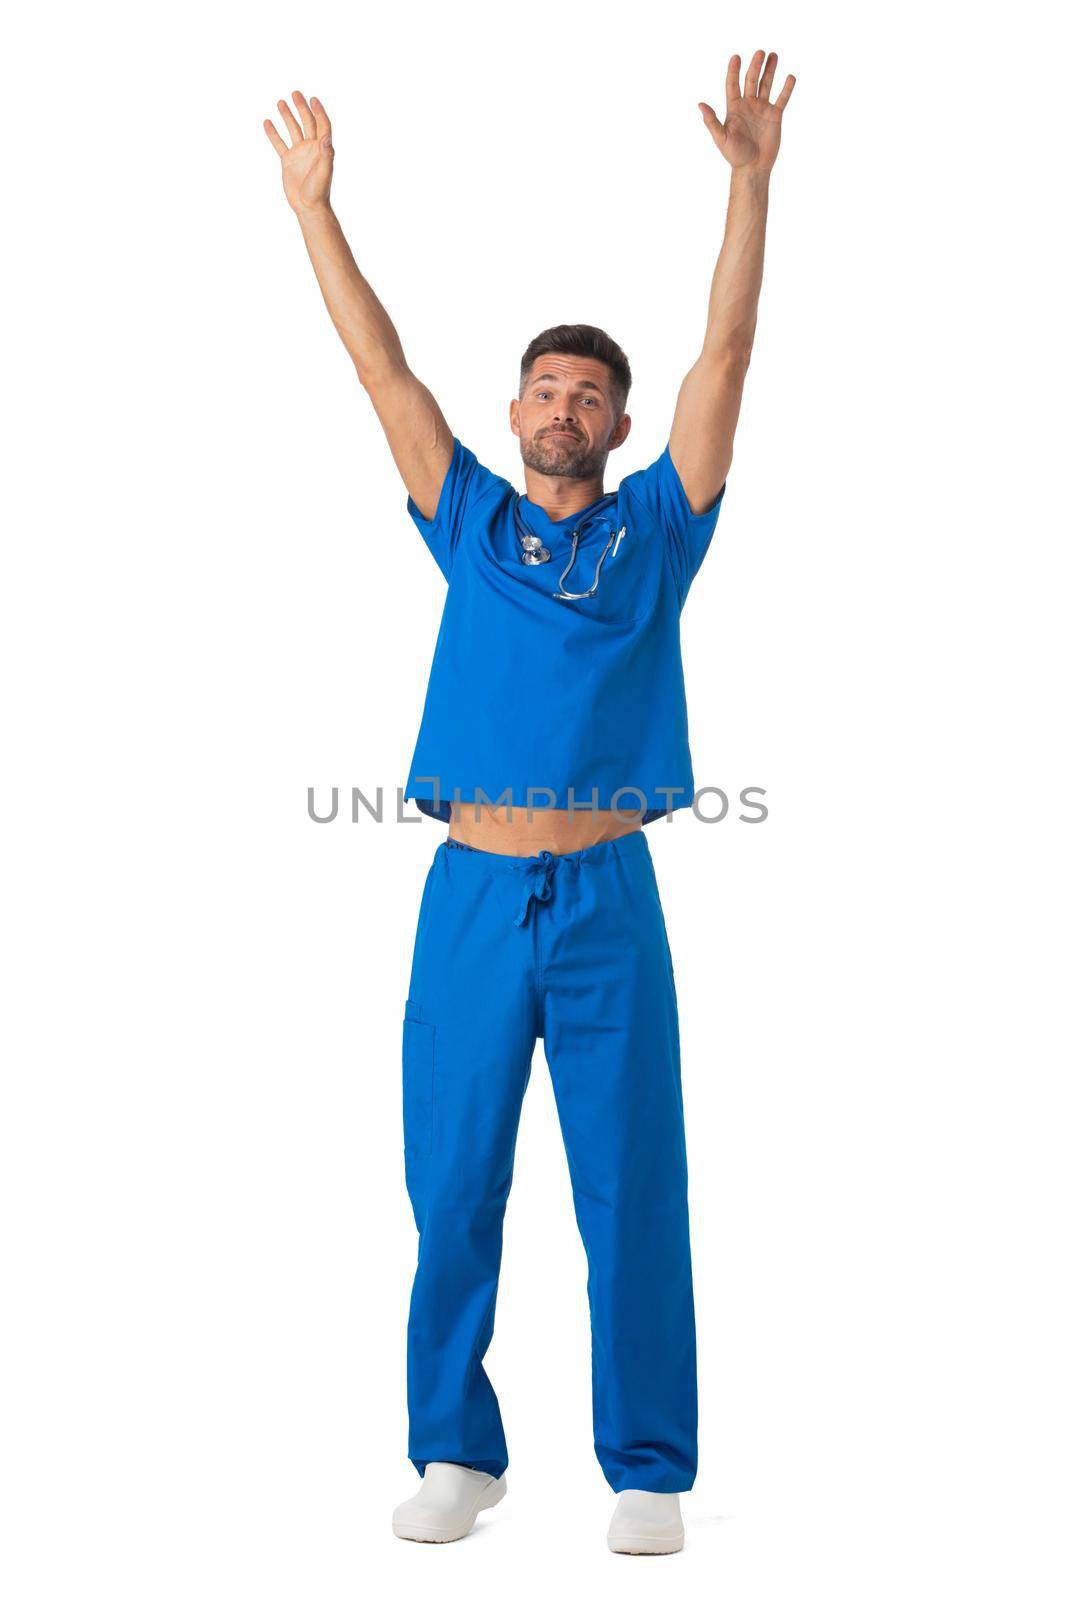 Healthcare worker with raised arms by ALotOfPeople